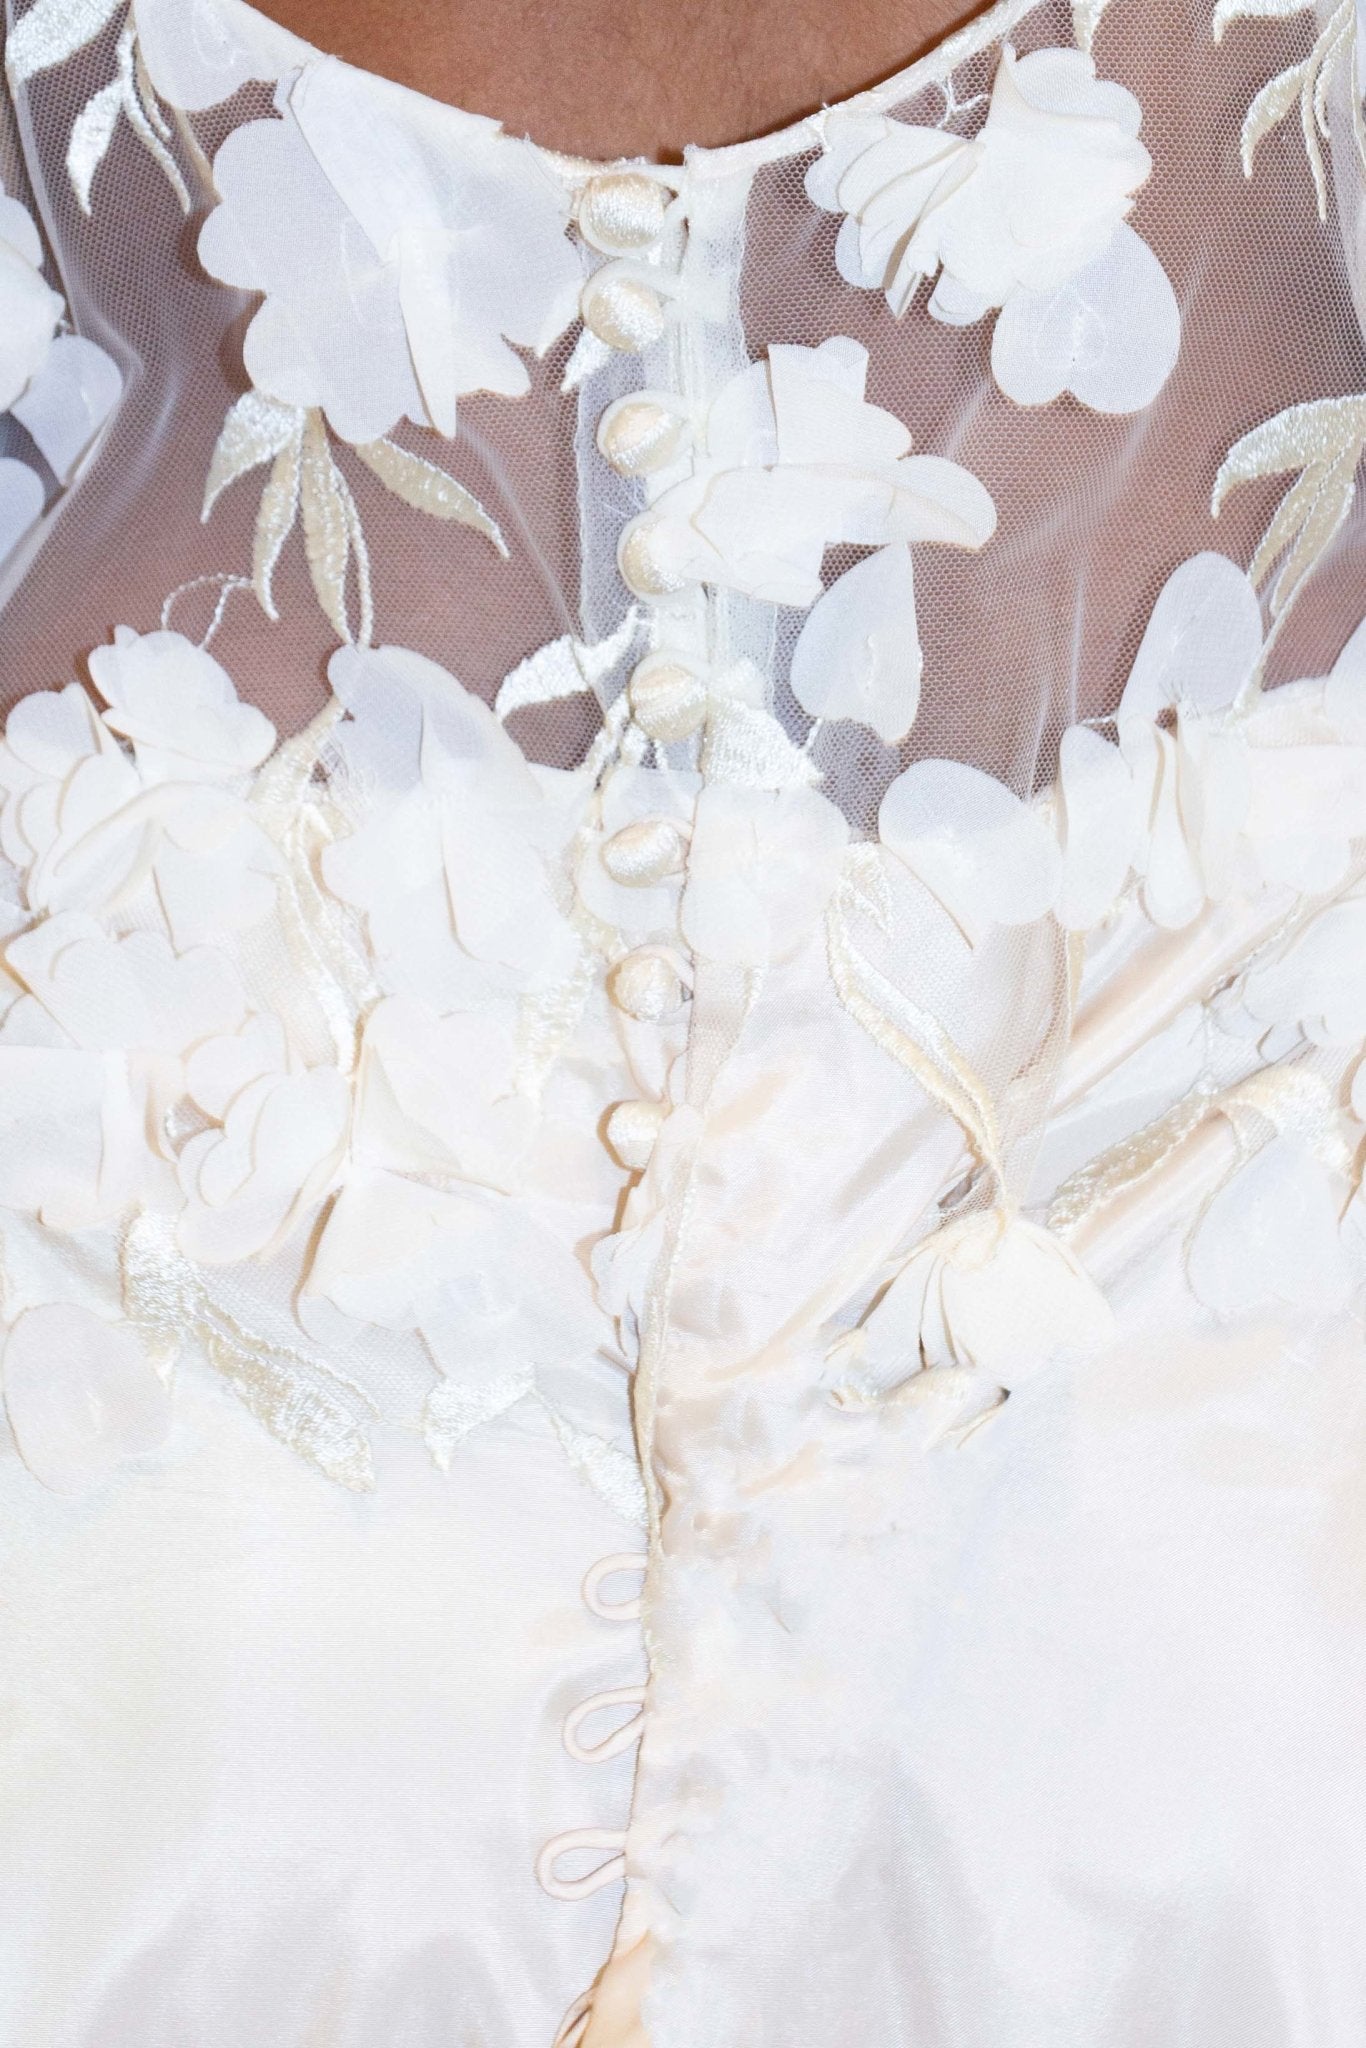 CHYATEE BESPOKE | Floral Champagne Dreams - CHYATEE